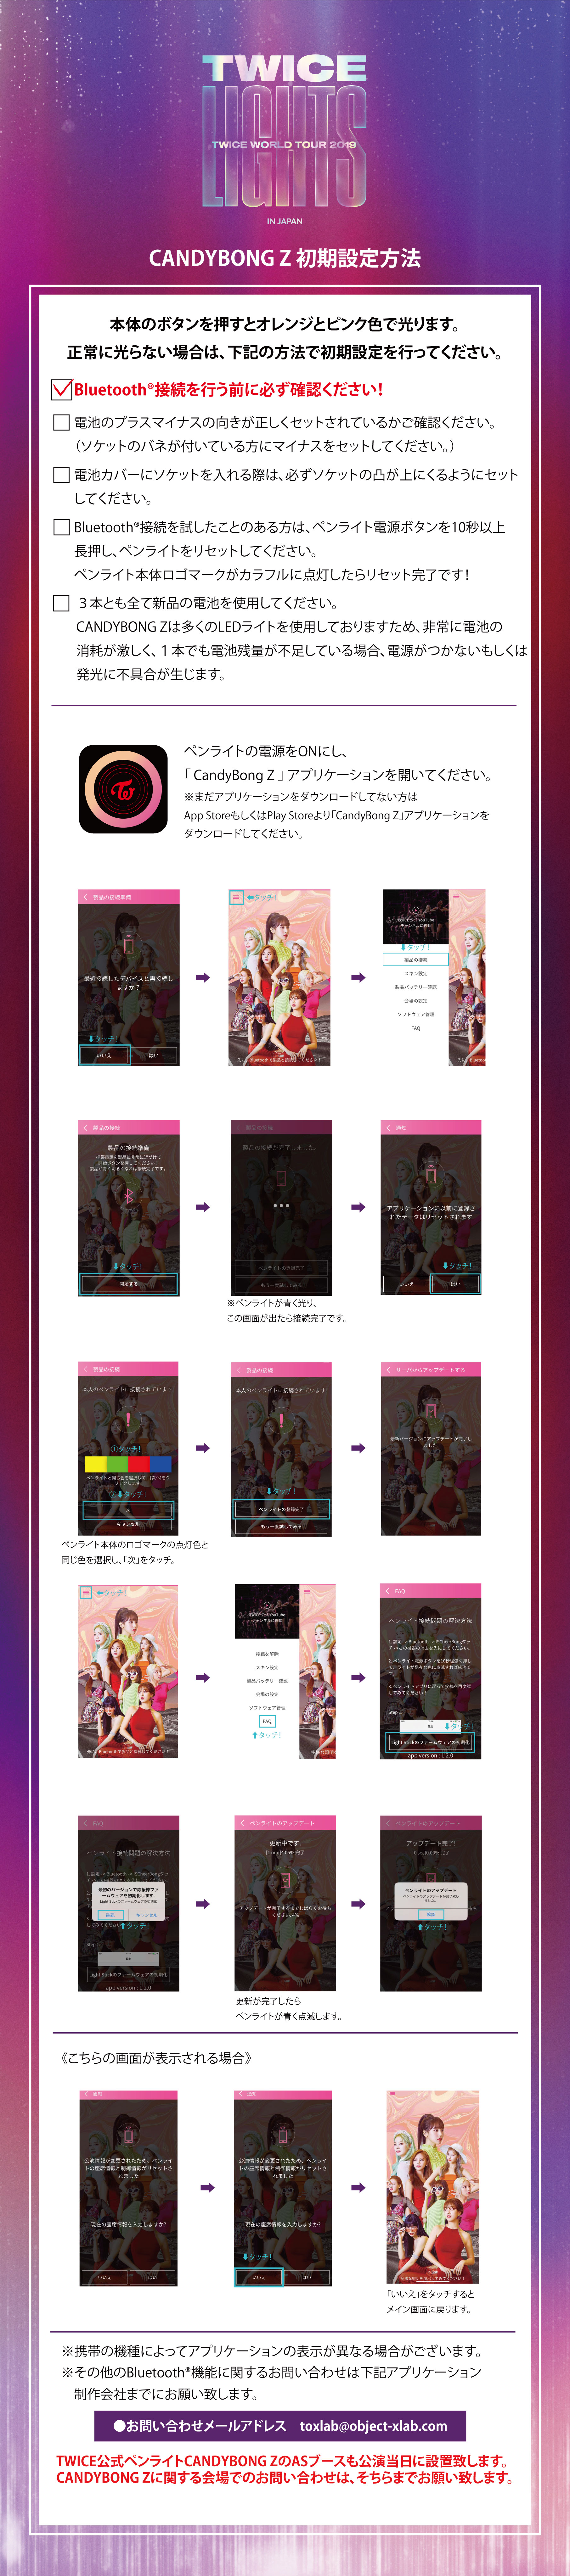 Twice Official Site